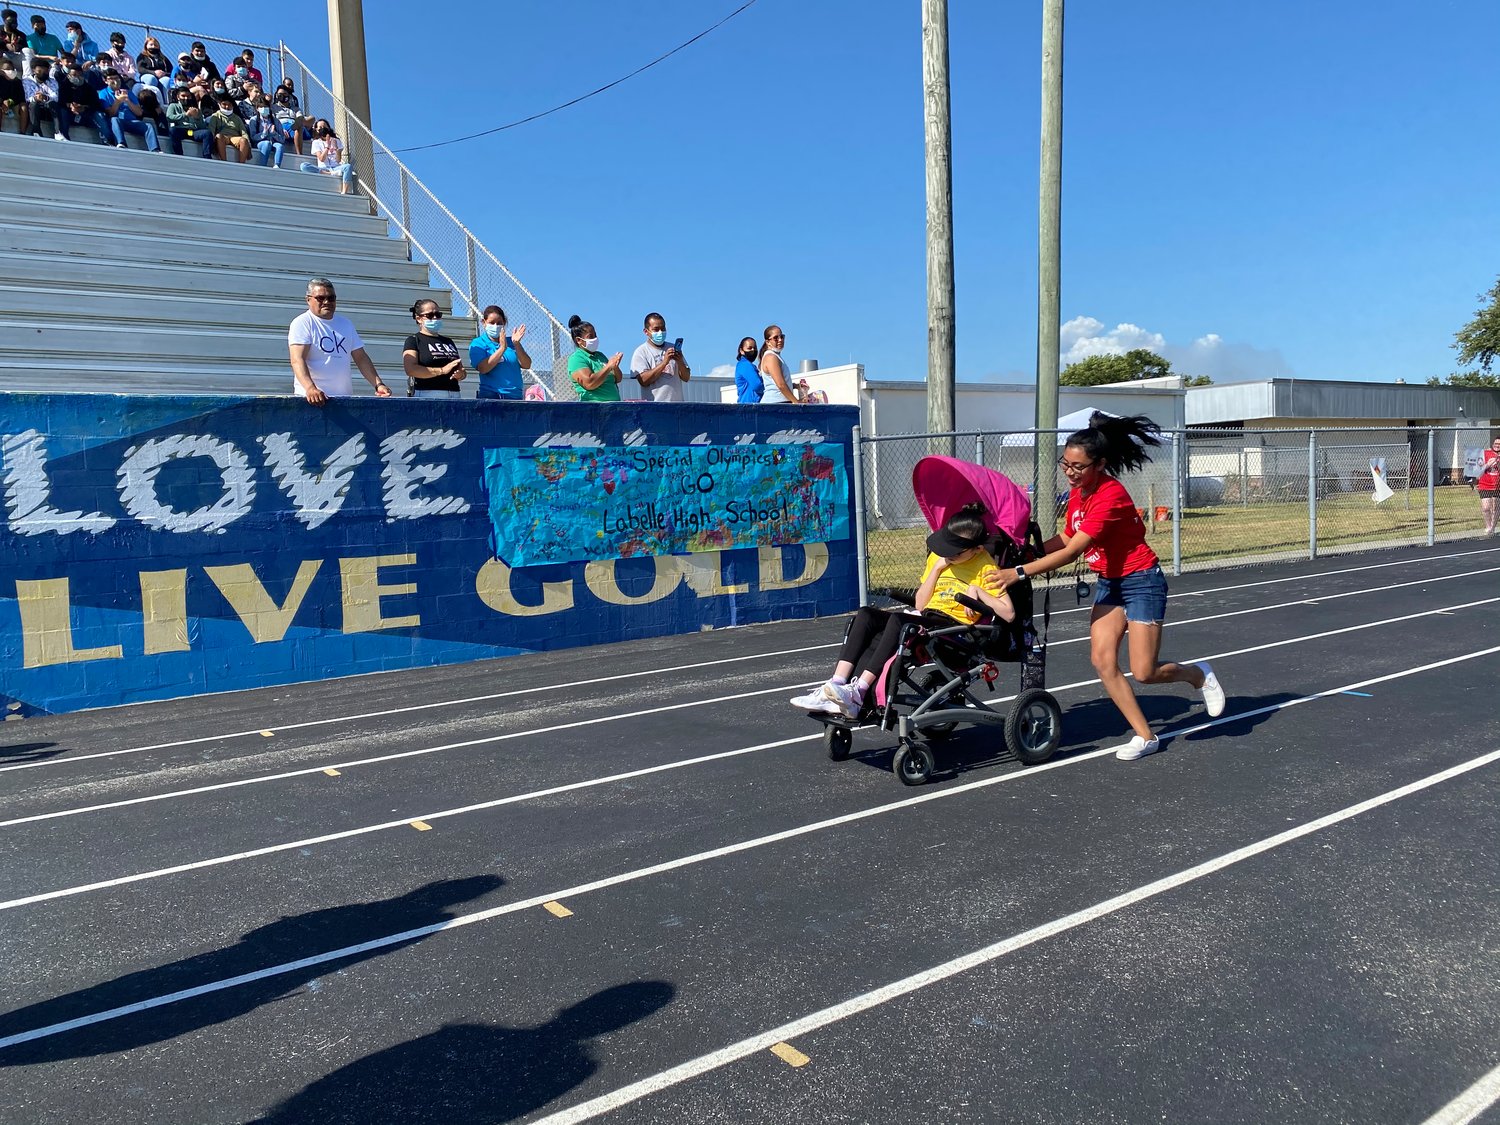 Natalie Cervantes wins the 25 Meter Wheelchair Race at the 5th Annual Hendry County Special Olympics End of Year Celebration.